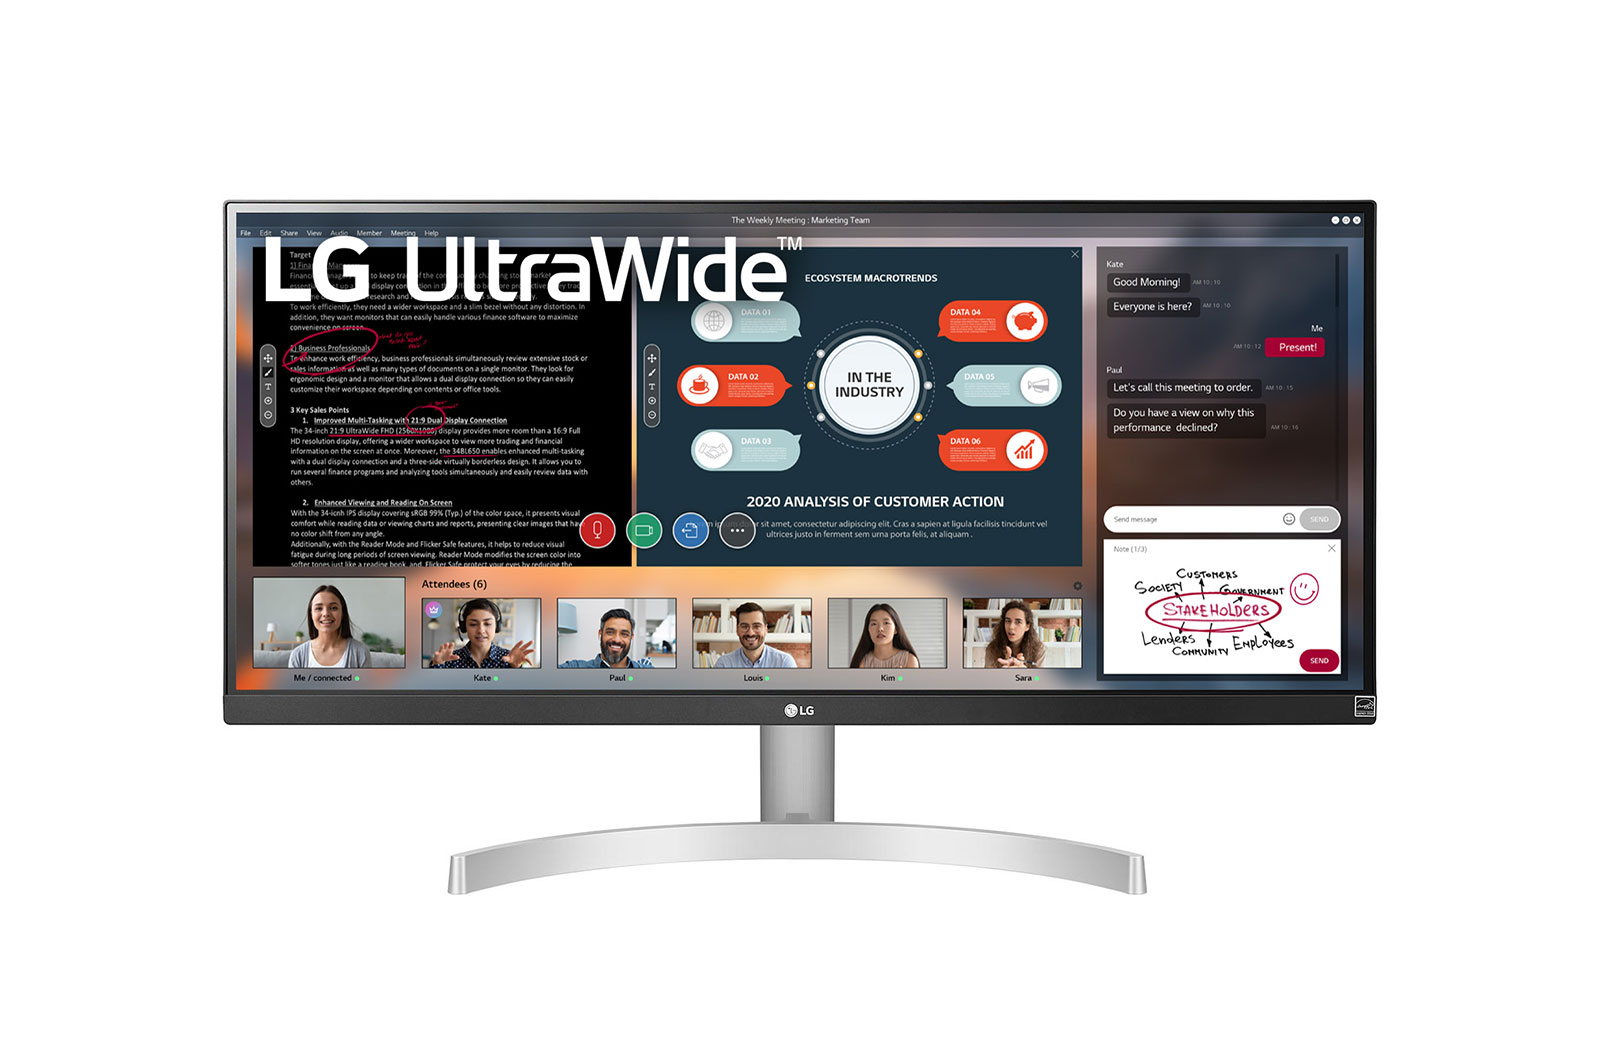 LG 29 (73.66cm) UltraWide™ Full HD HDR IPS Monitor. Now see wider and do more, seamlessly while you work from home. Expand the way you work with the LG UltraWide Monitor., 29WN600-W